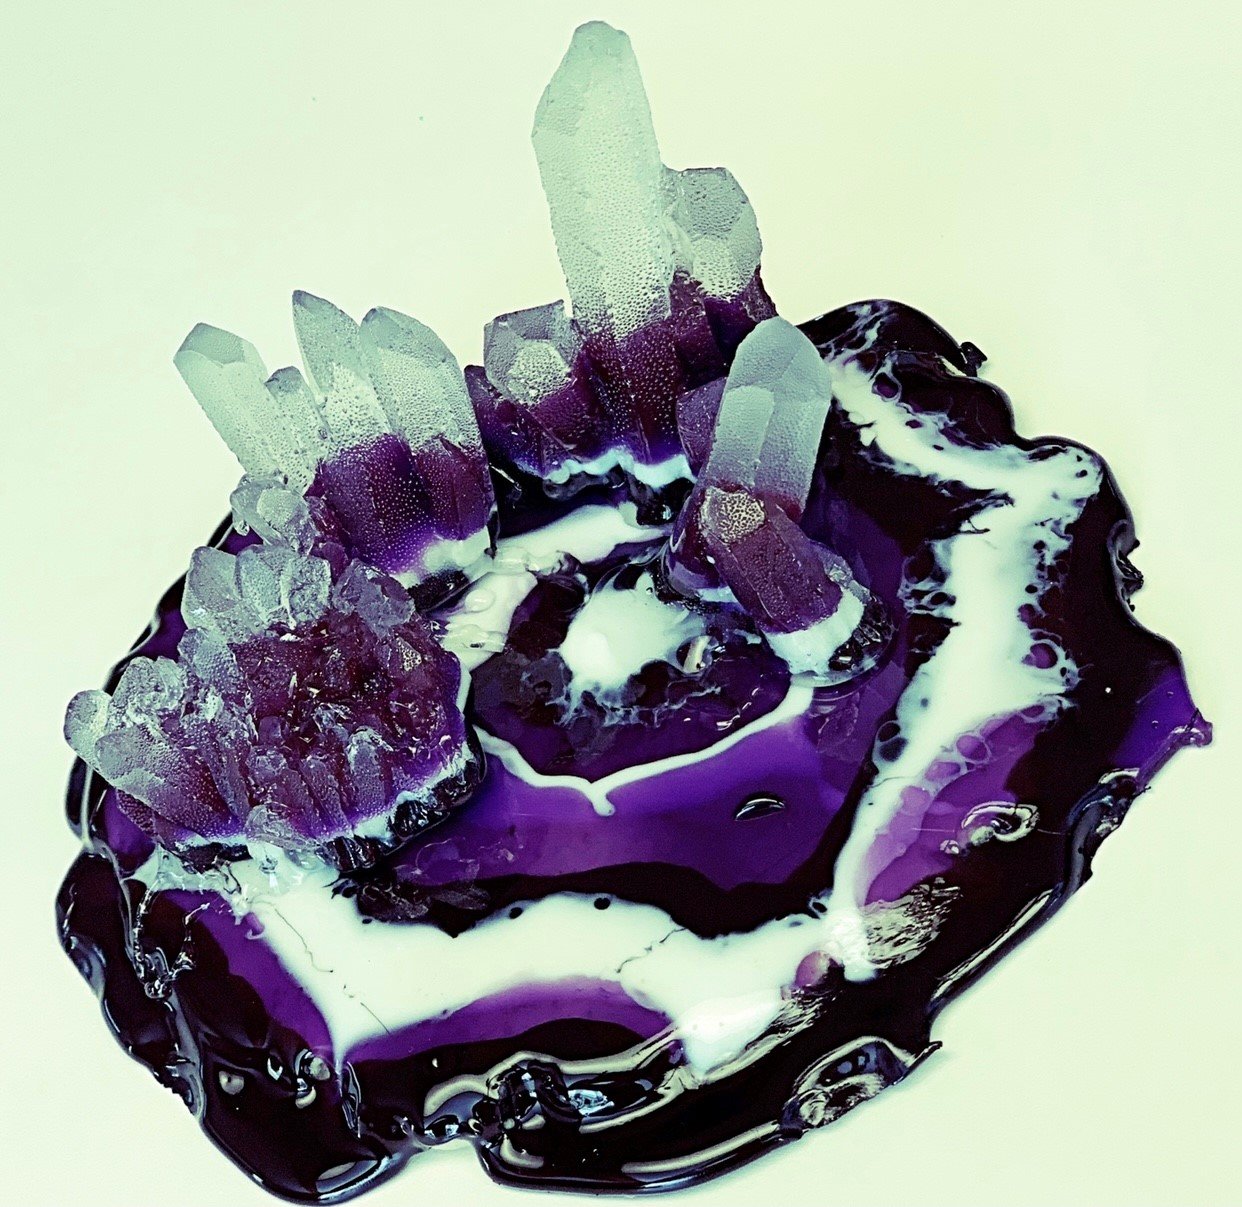 According to Mycrystals.com, “The eye-catching amethyst crystals have a long history of meanings and properties, all of which are positive, as they were known to bring forth the purest aspirations of human kind.